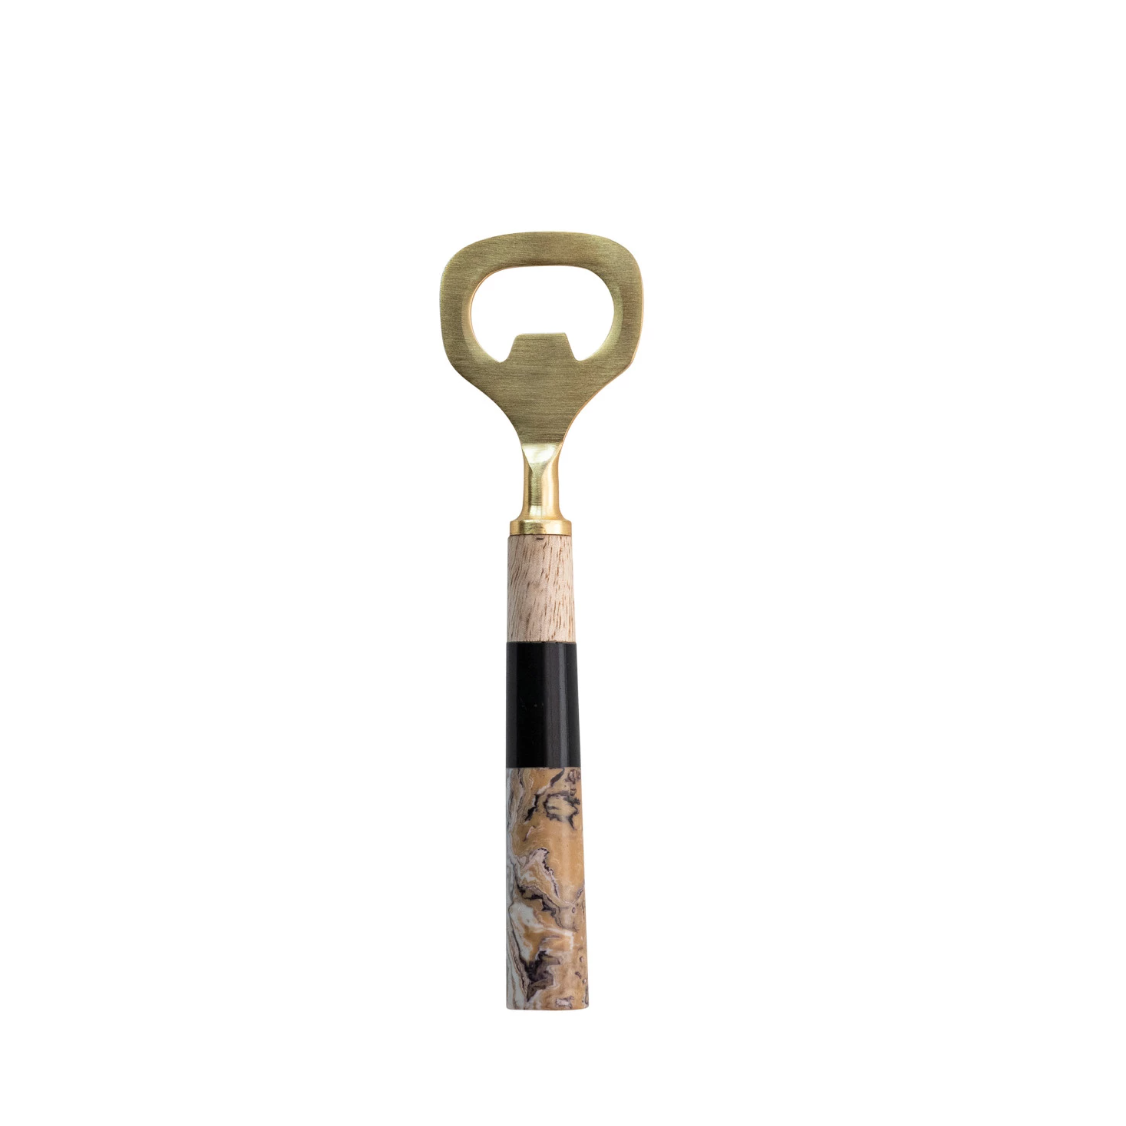 Bottle Opener in Gold and Marbled Resin